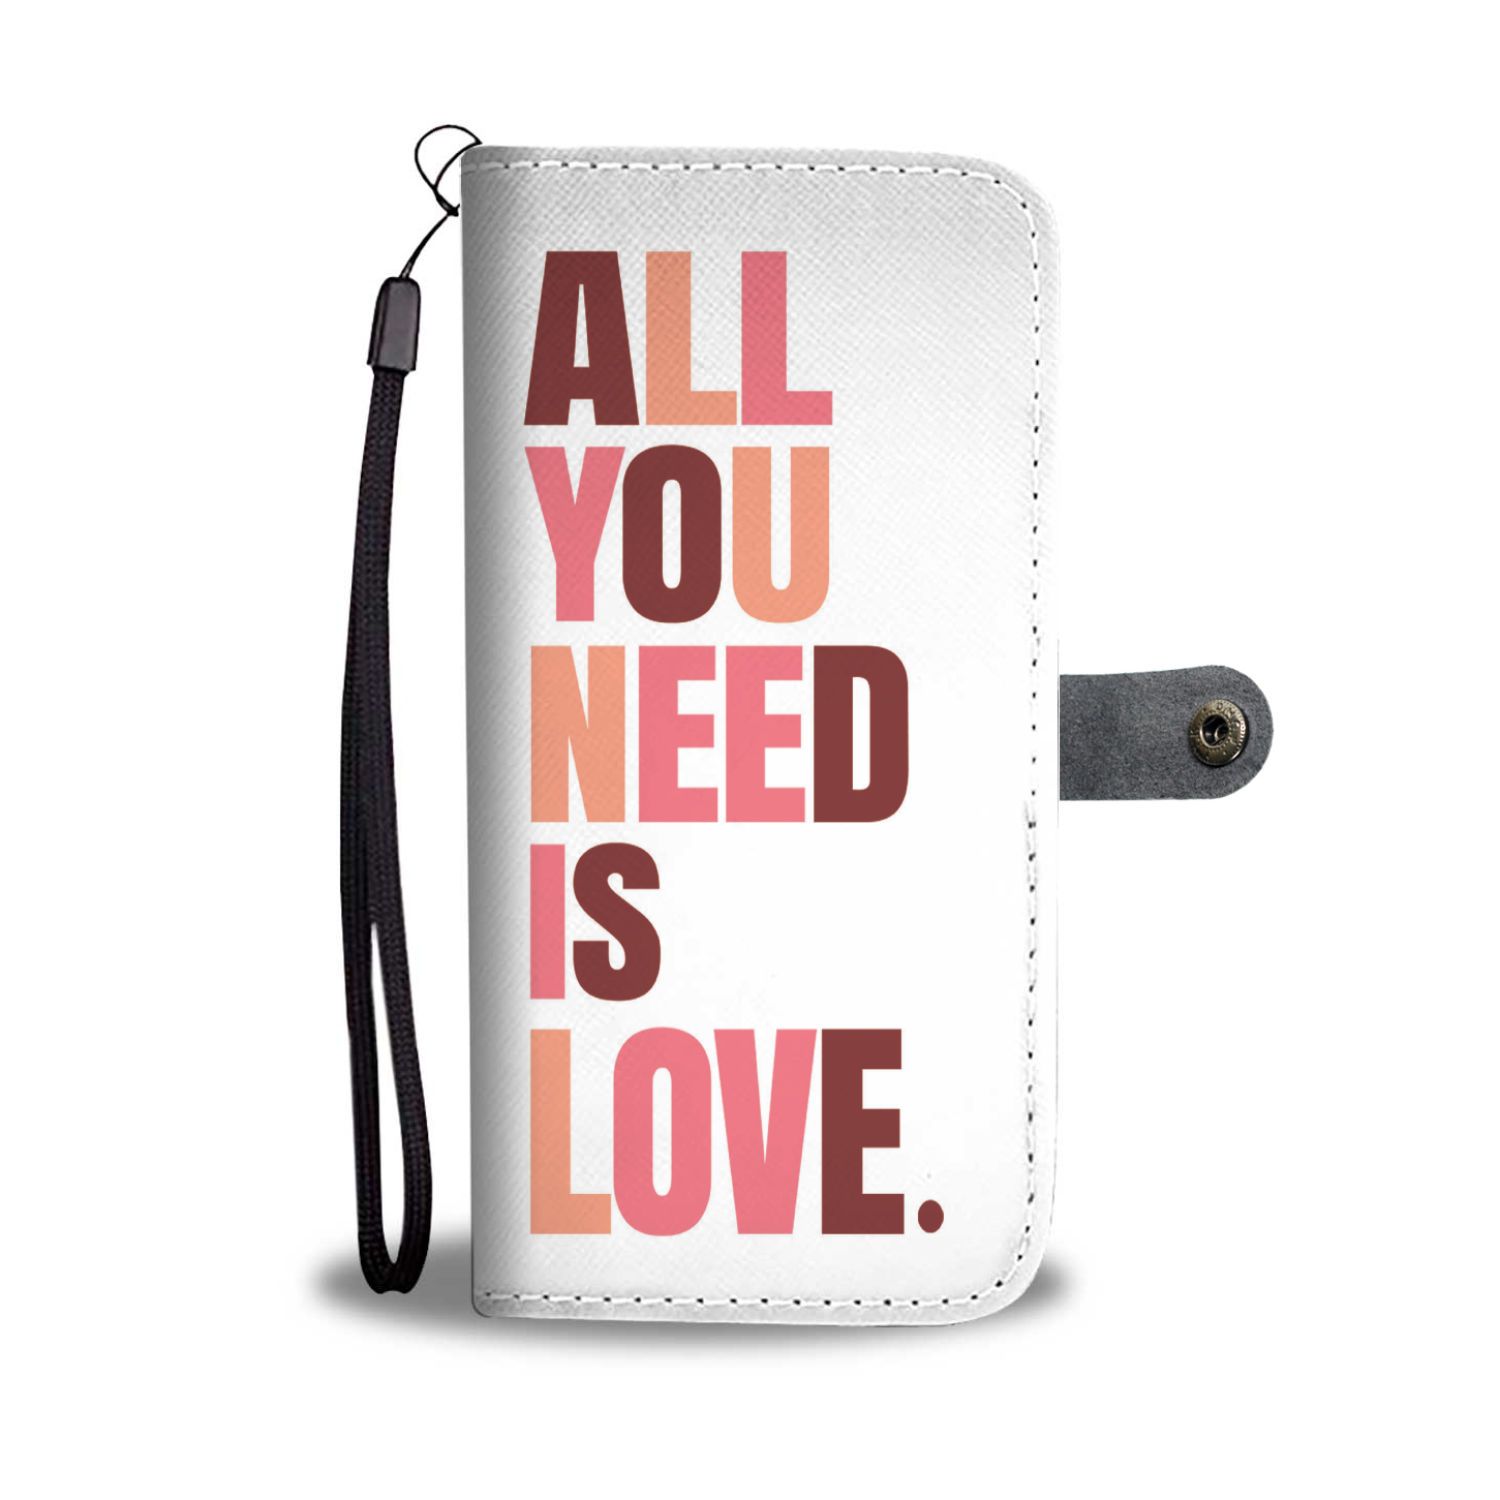 "All You Need Is Love" Wallet.